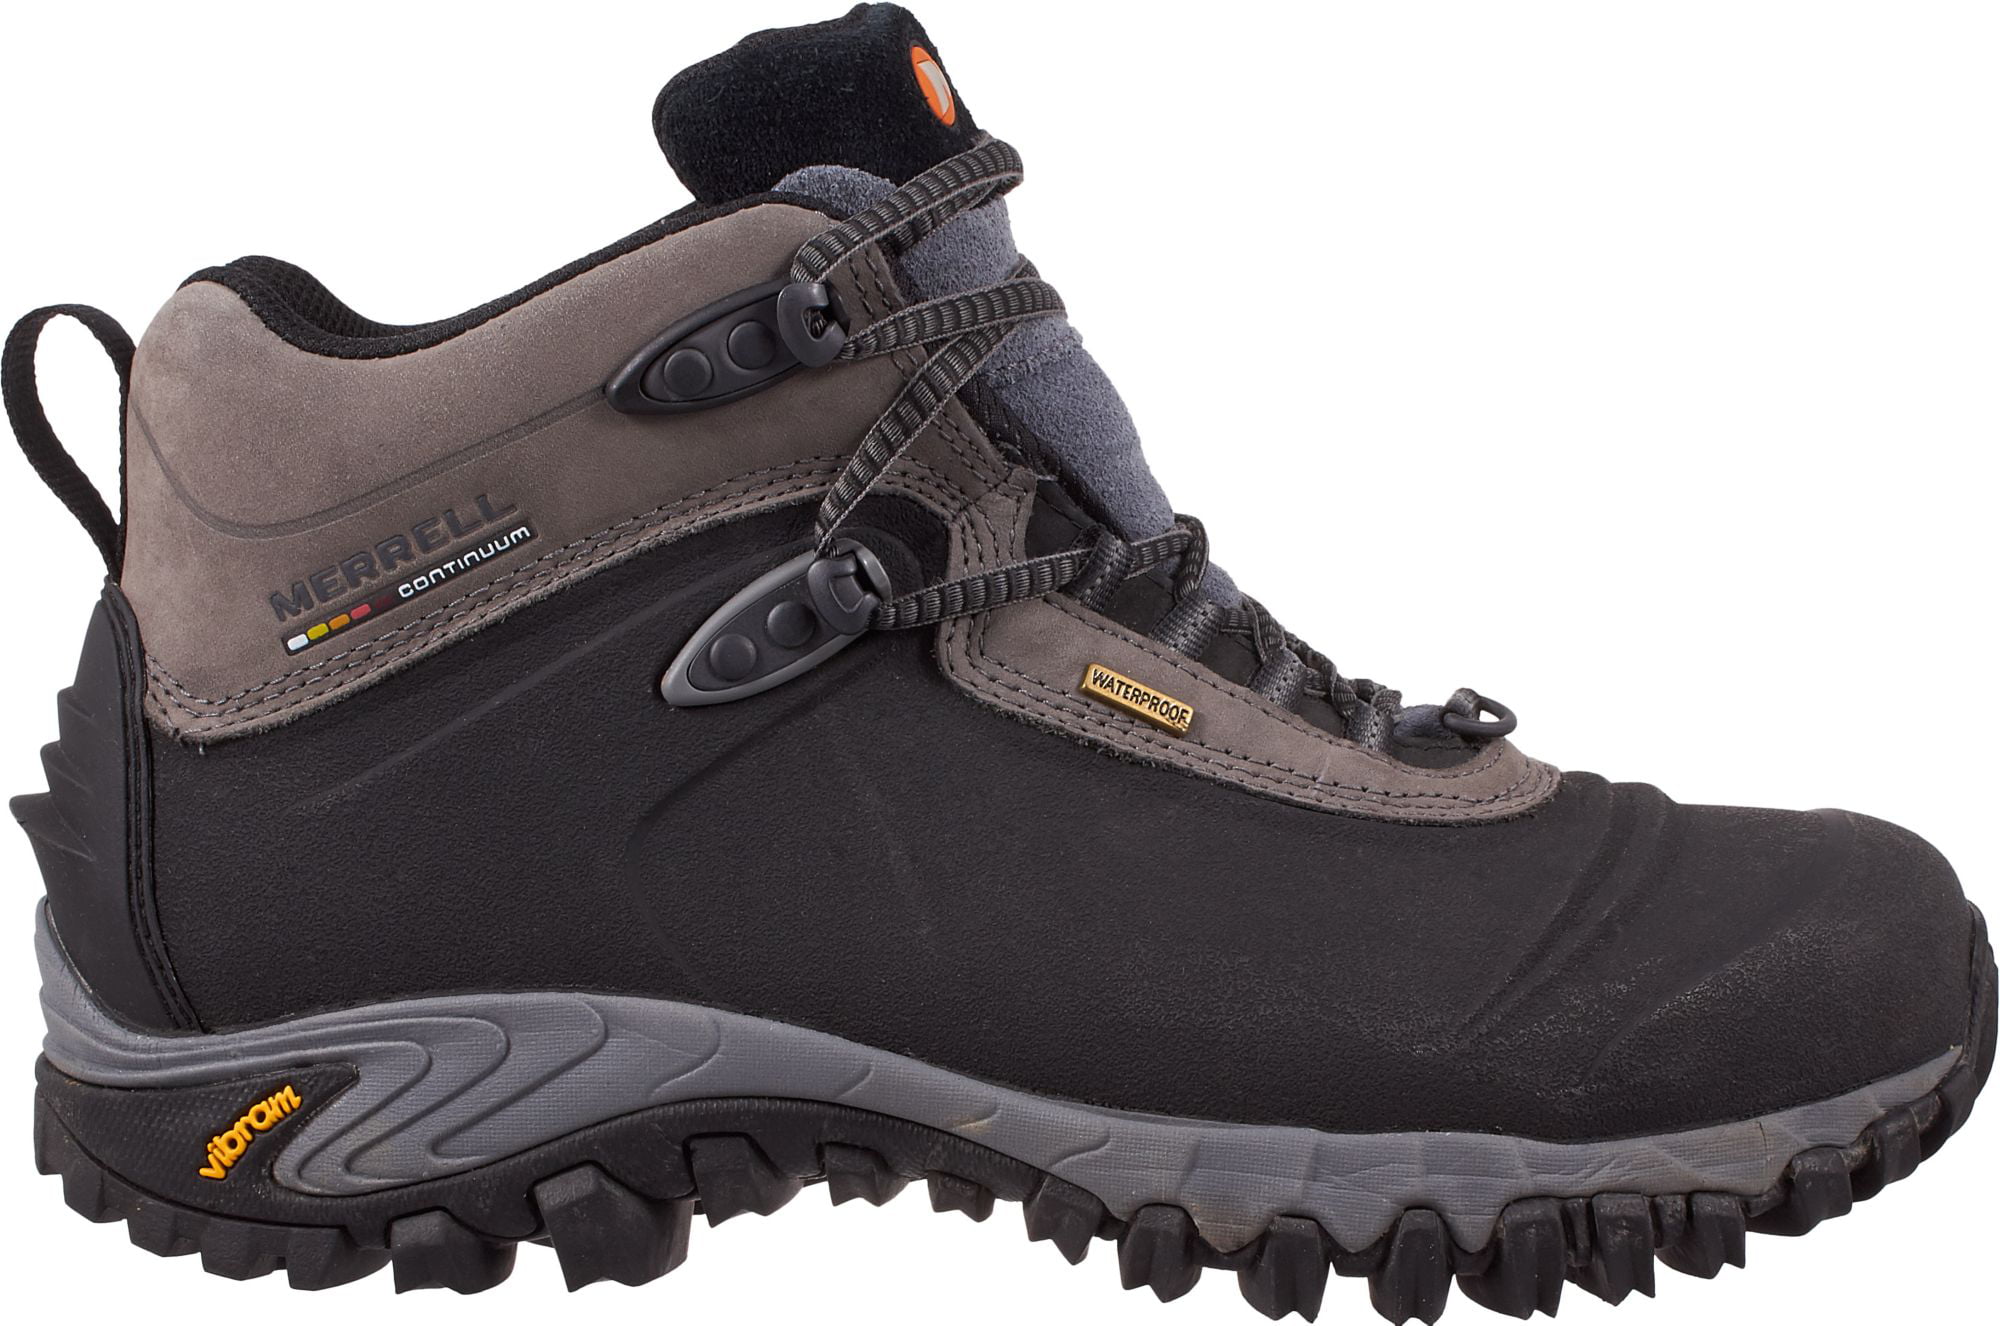 merrell women's thermo 6 shell waterproof winter boots